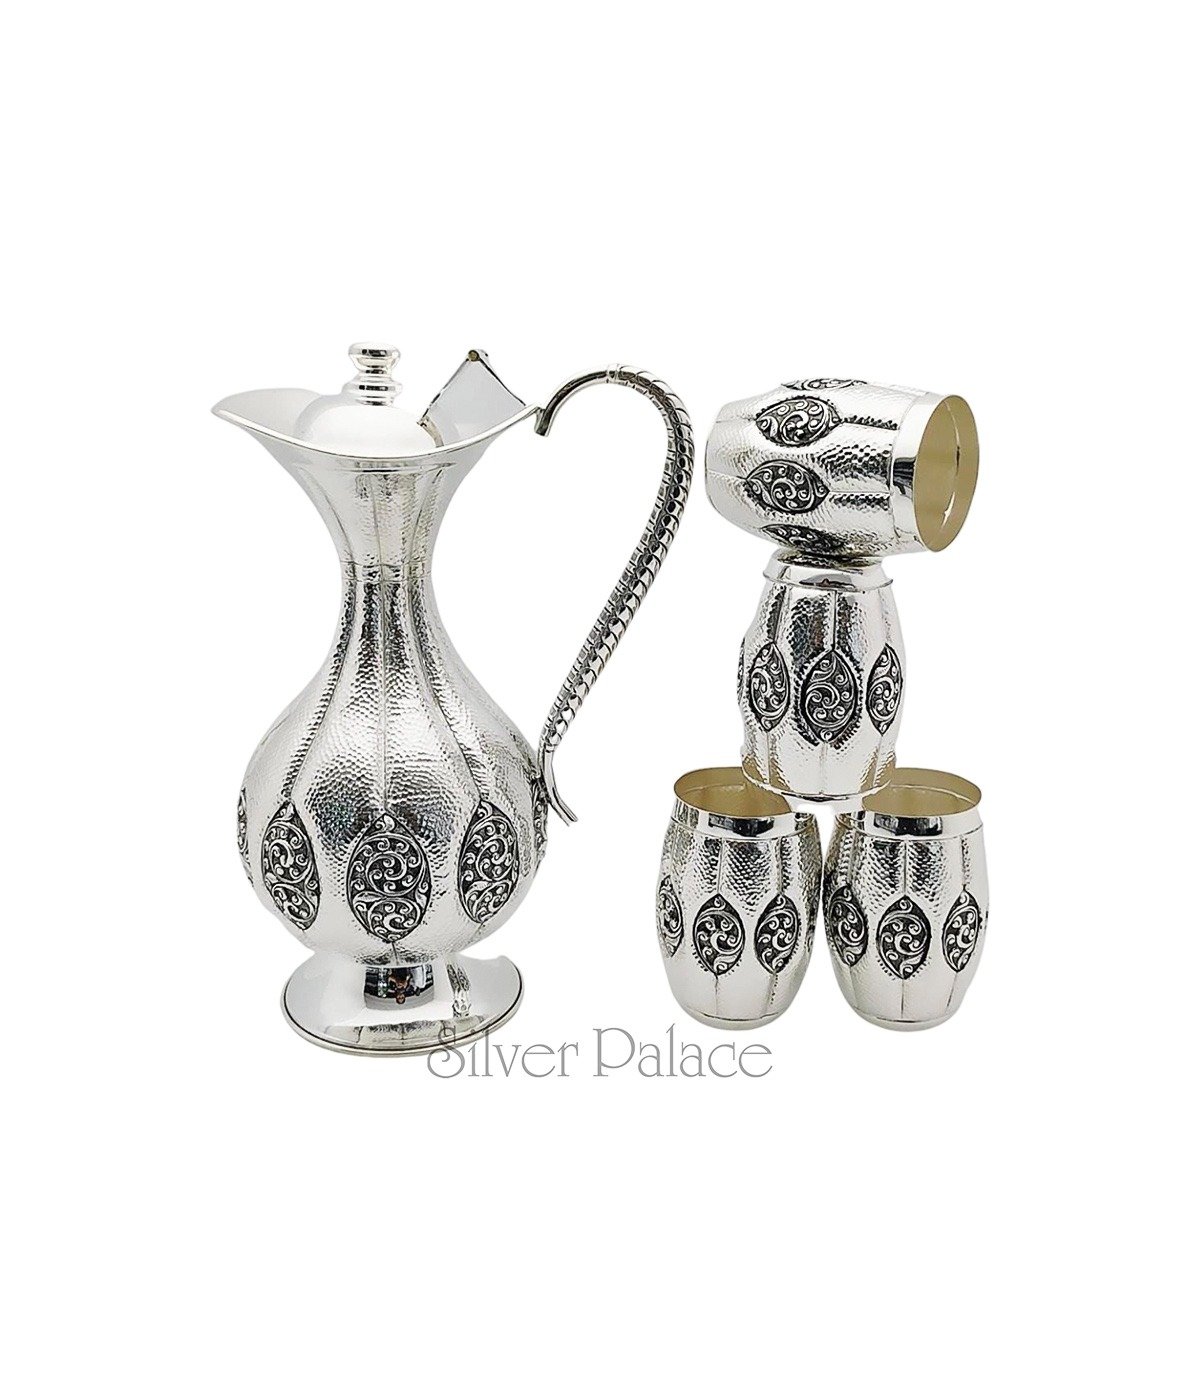 92.5 OXIDISED SILVER PUMPKIN SHAPED WATER JUG AND TUMBLERS FOR SERVING 